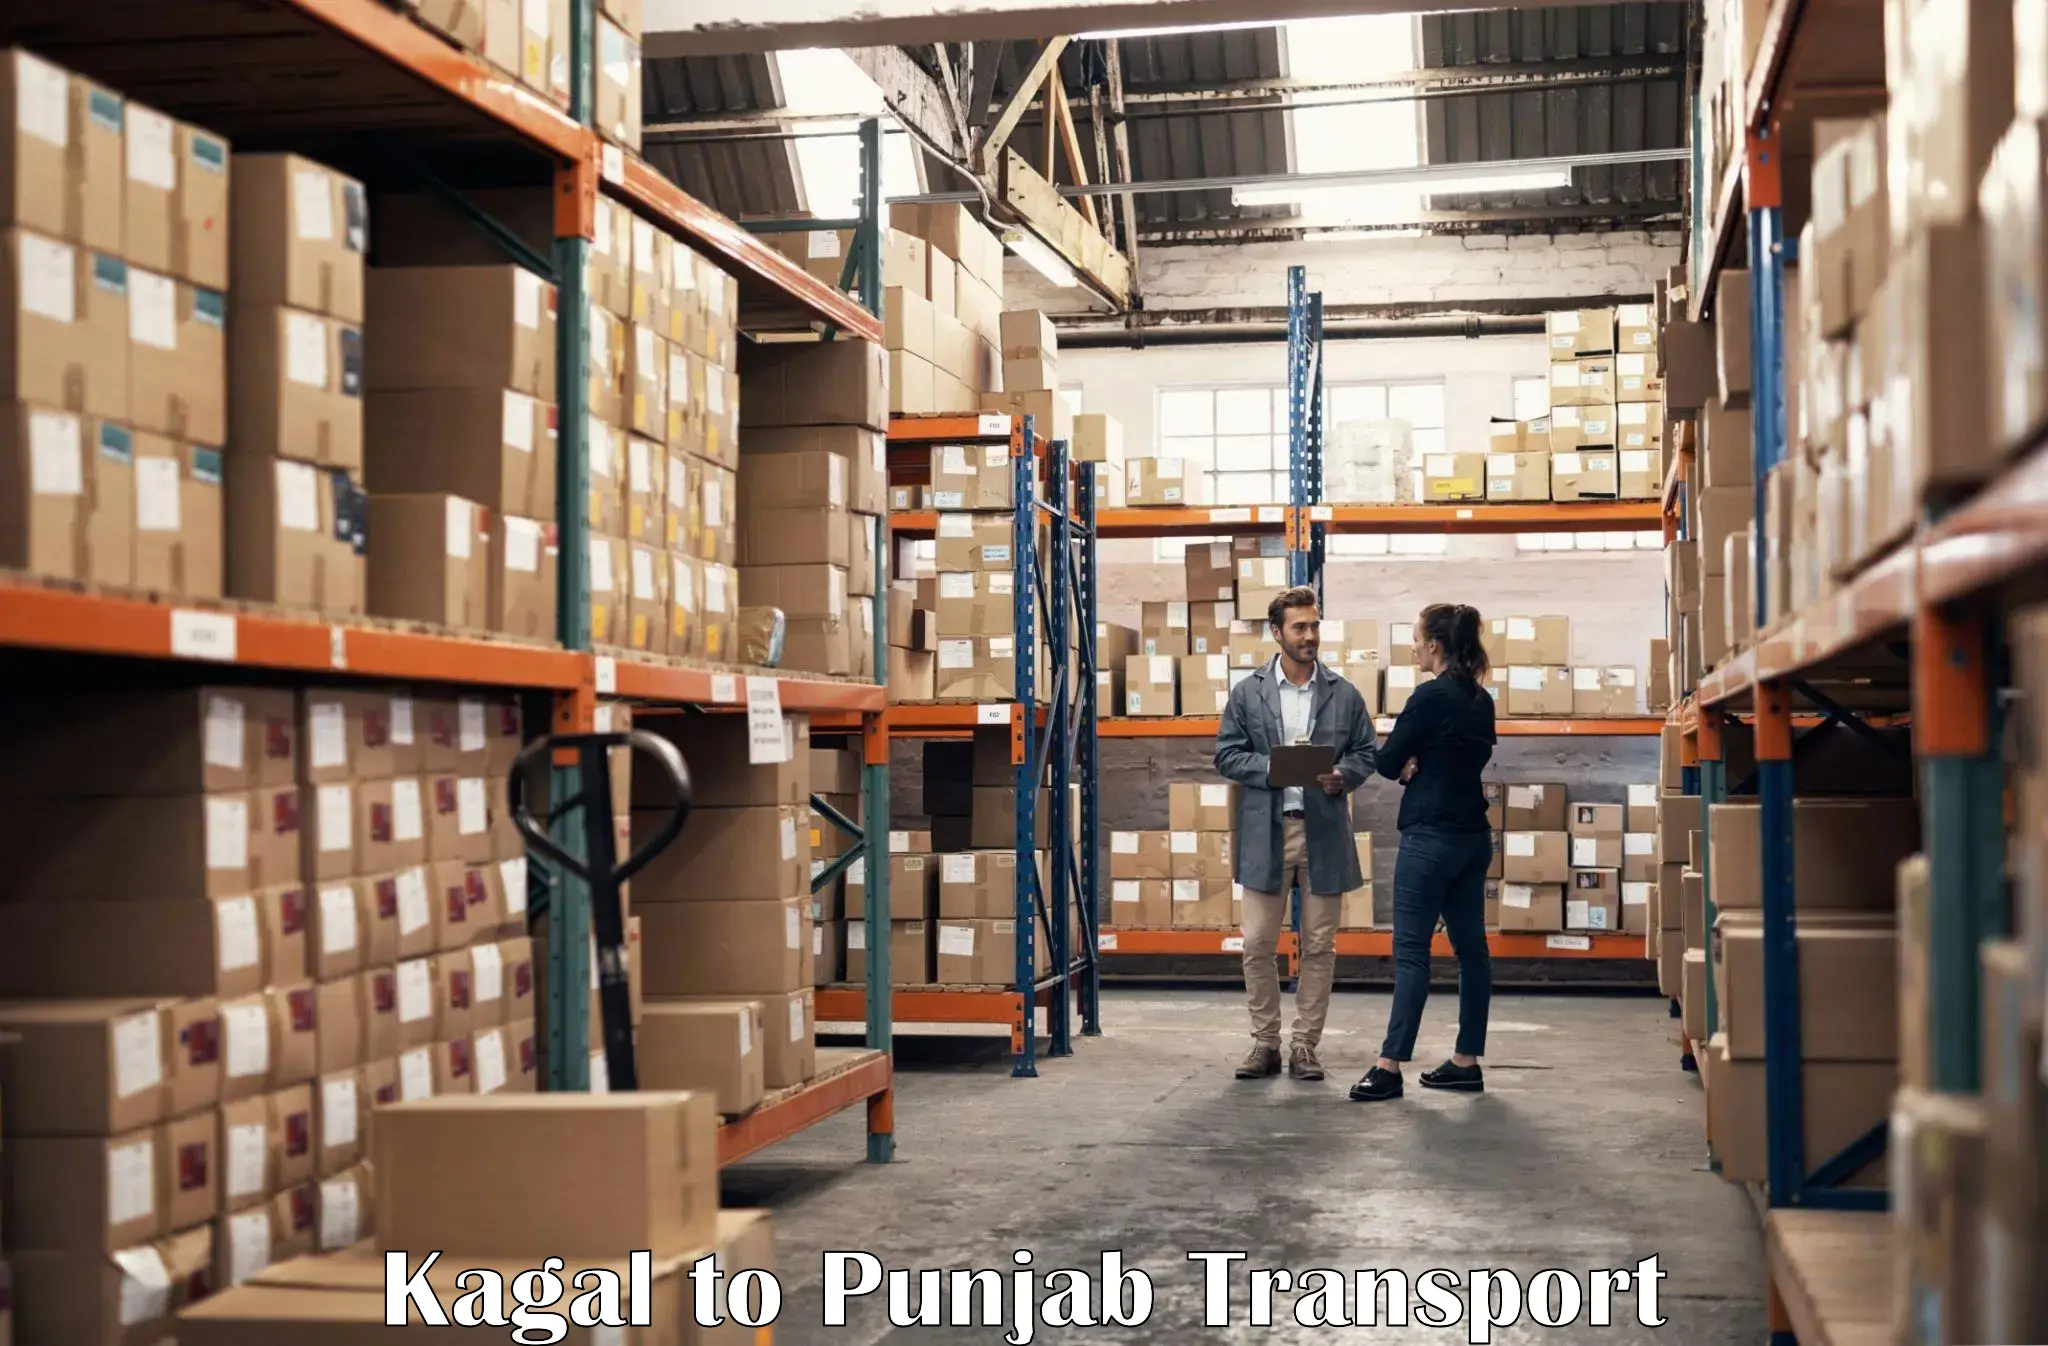 Express transport services in Kagal to Mohali